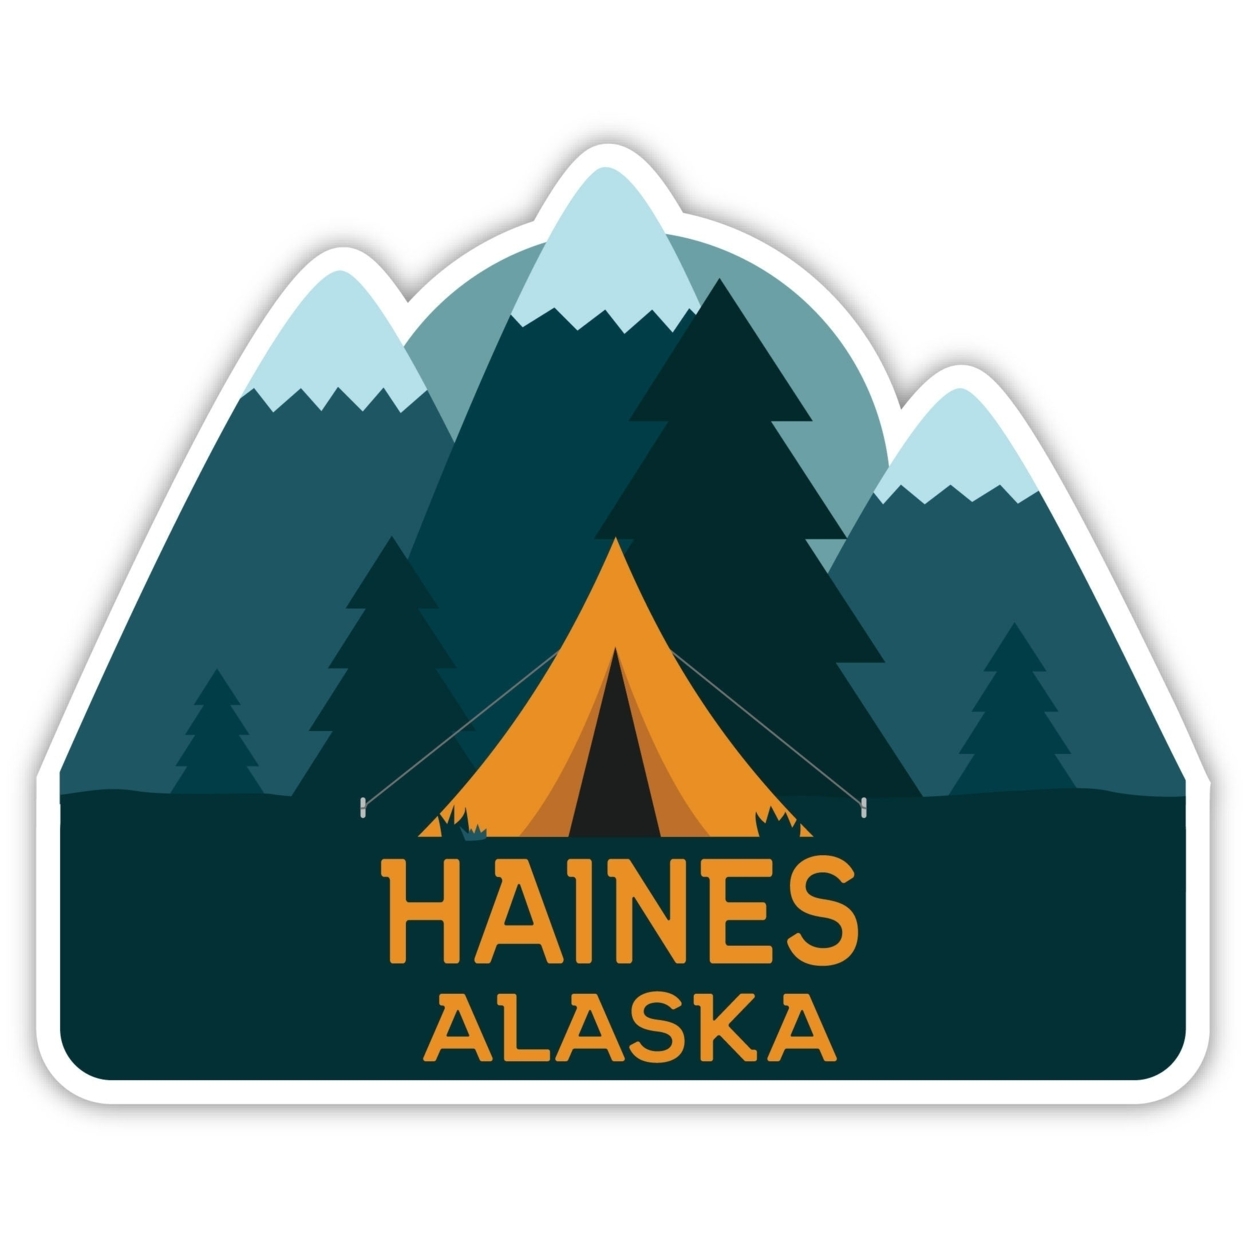 Haines Alaska Souvenir Decorative Stickers (Choose Theme And Size) - 4-Pack, 4-Inch, Tent